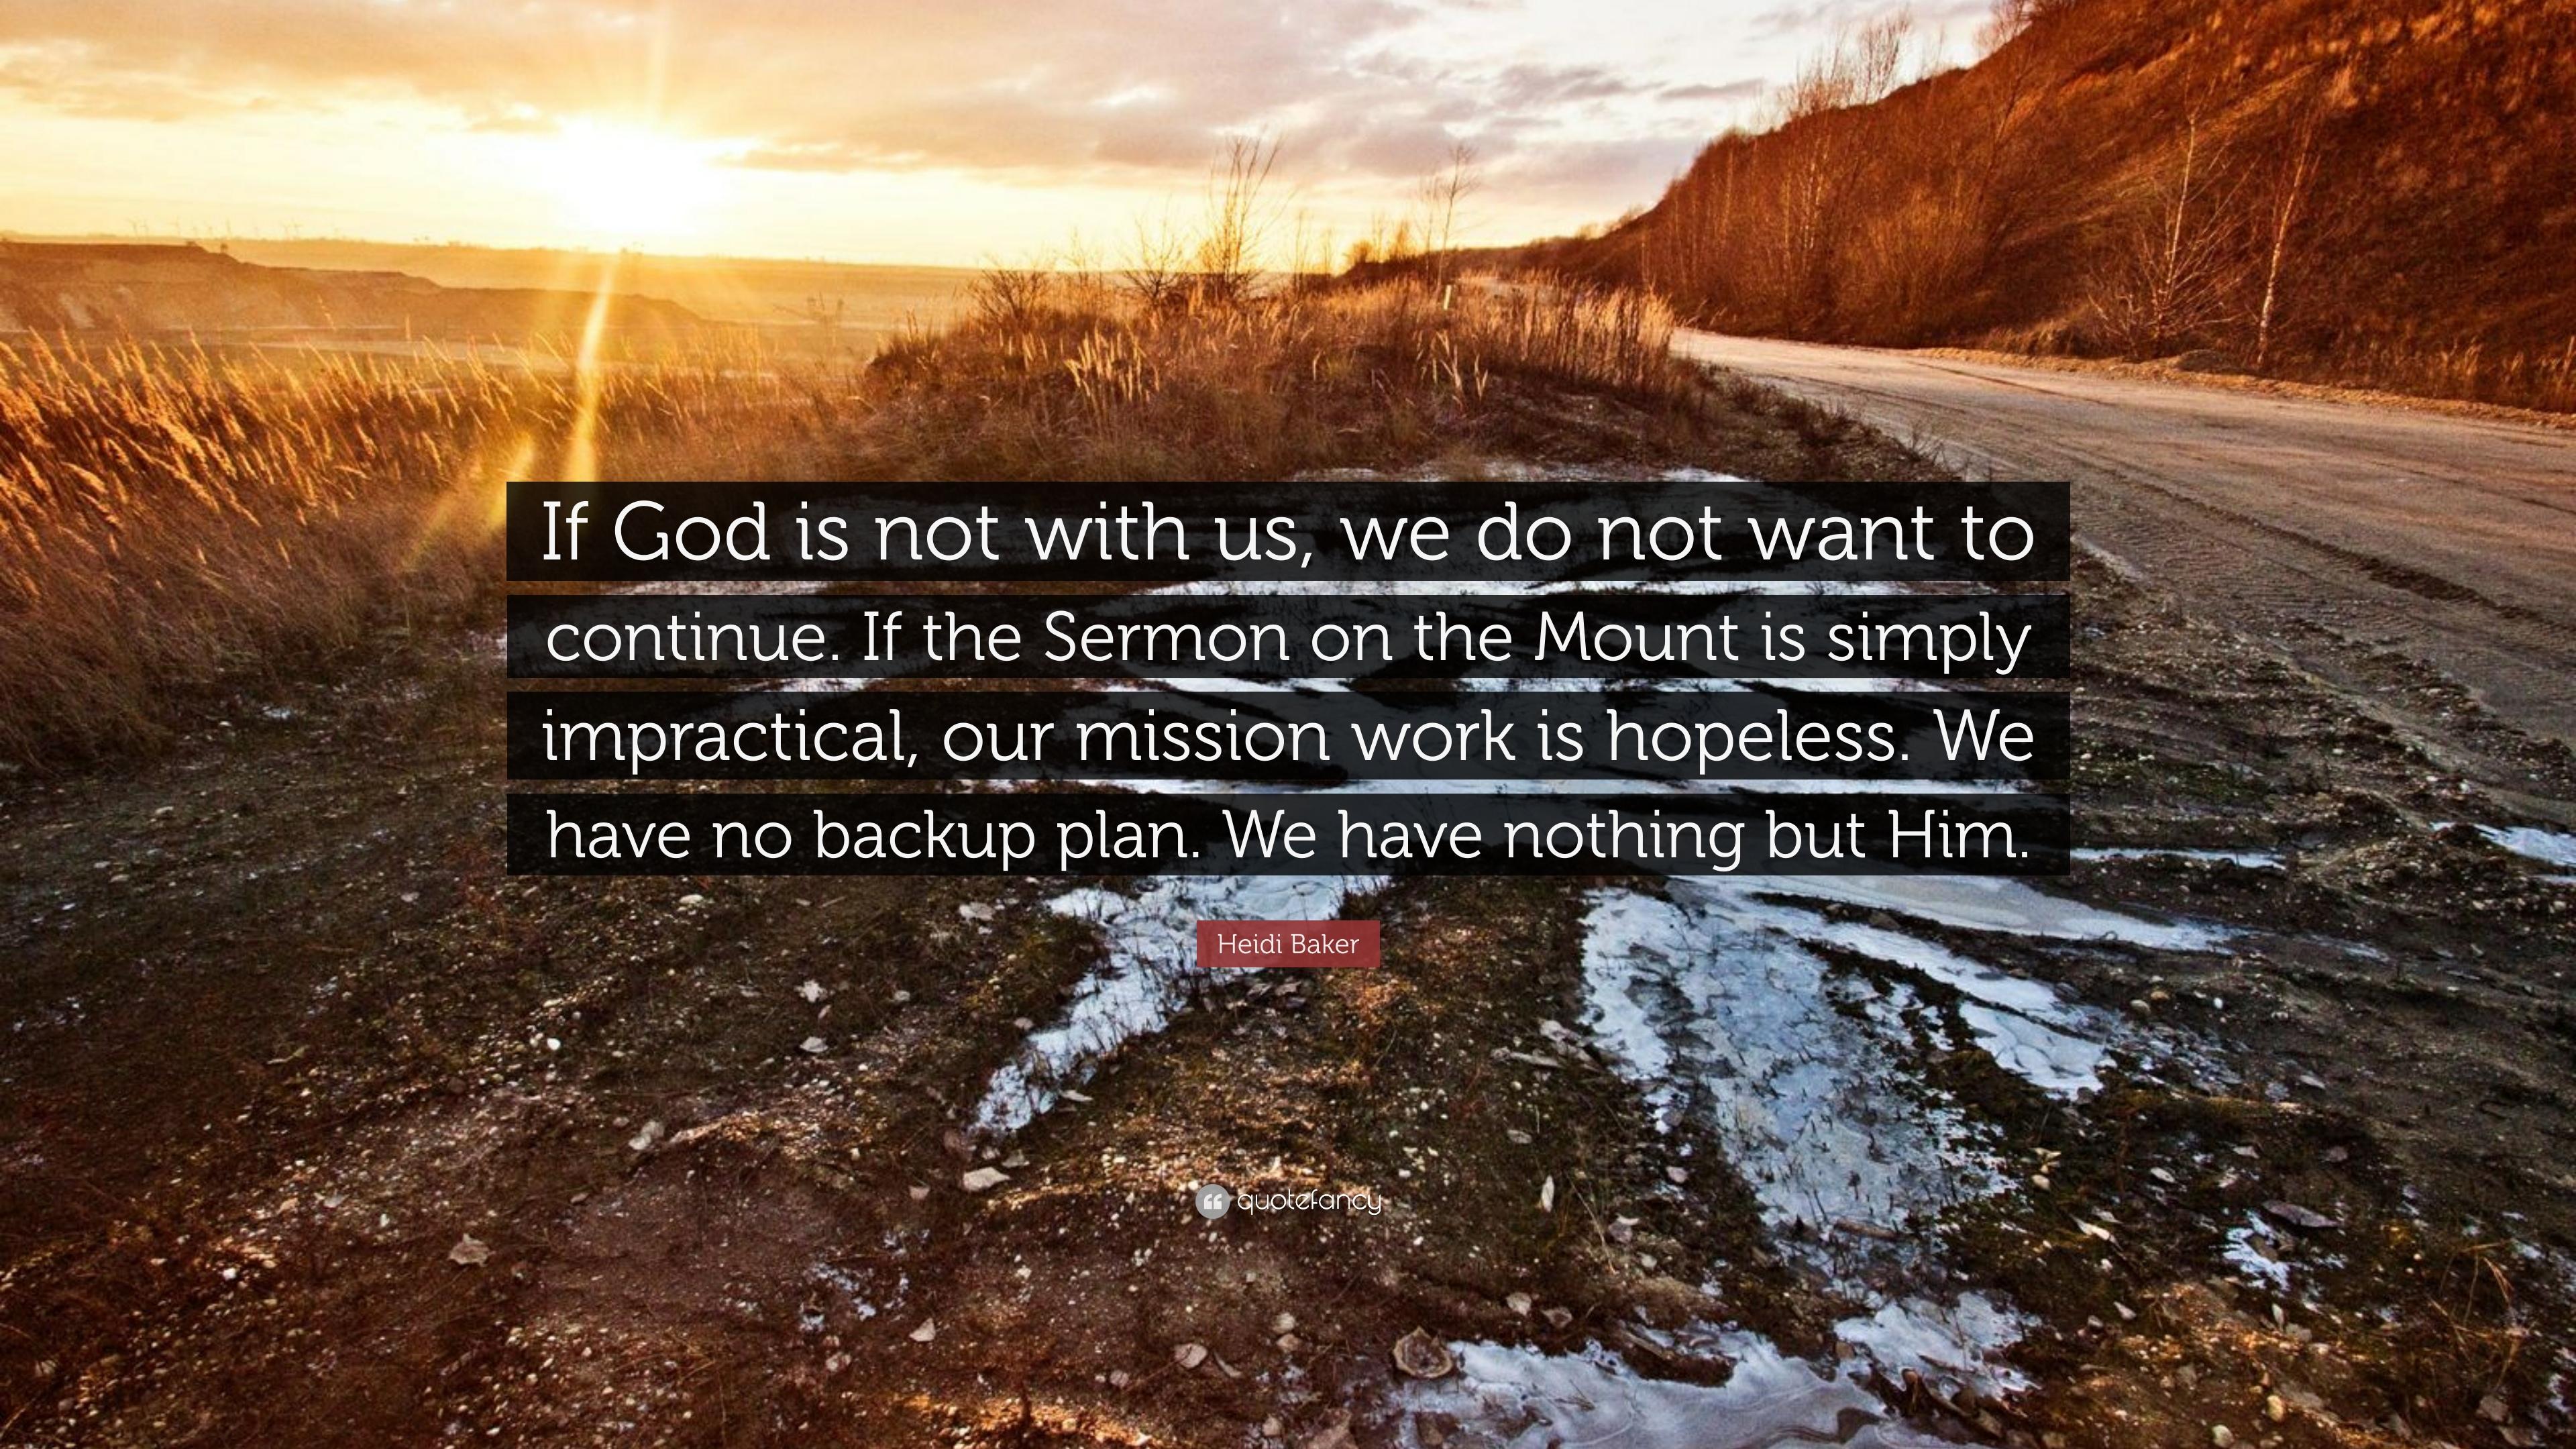 Heidi Baker Quote: “If God is not with us, we do not want to